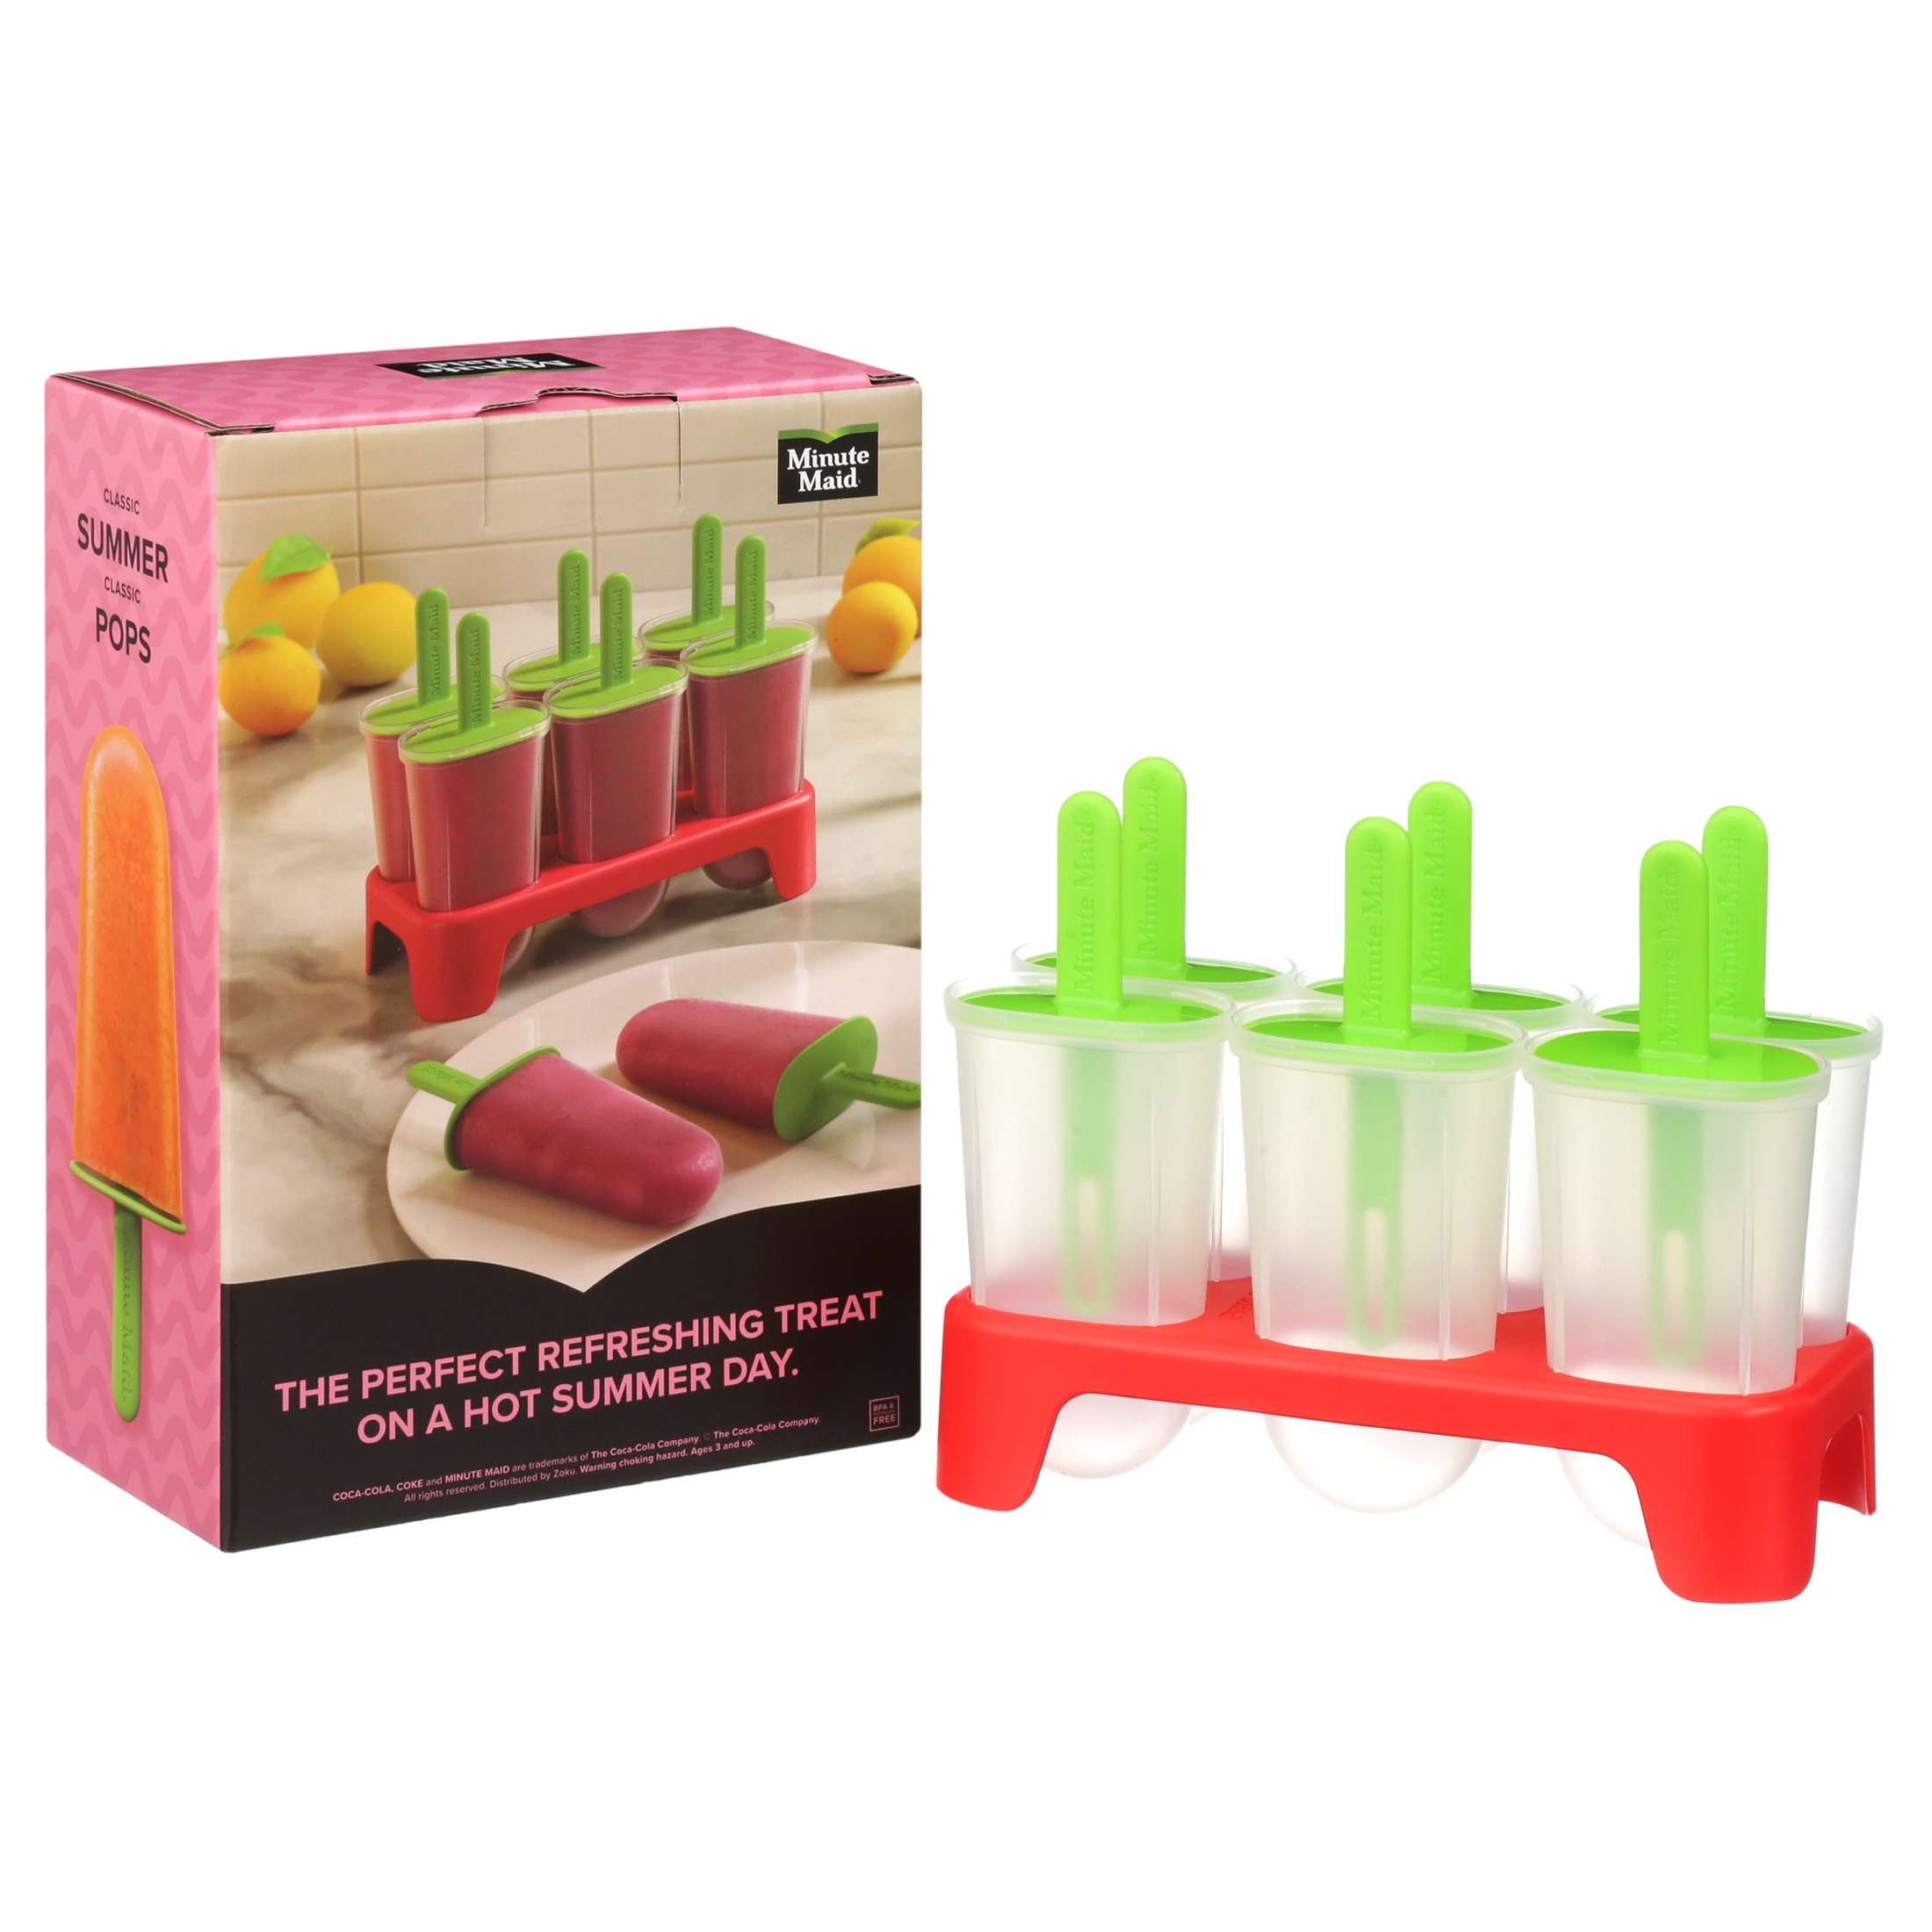 Minute Maid Set of 3 Ice Pop Molds - 1 Red, 1 Teal, 1 Purple - image 4 of 8